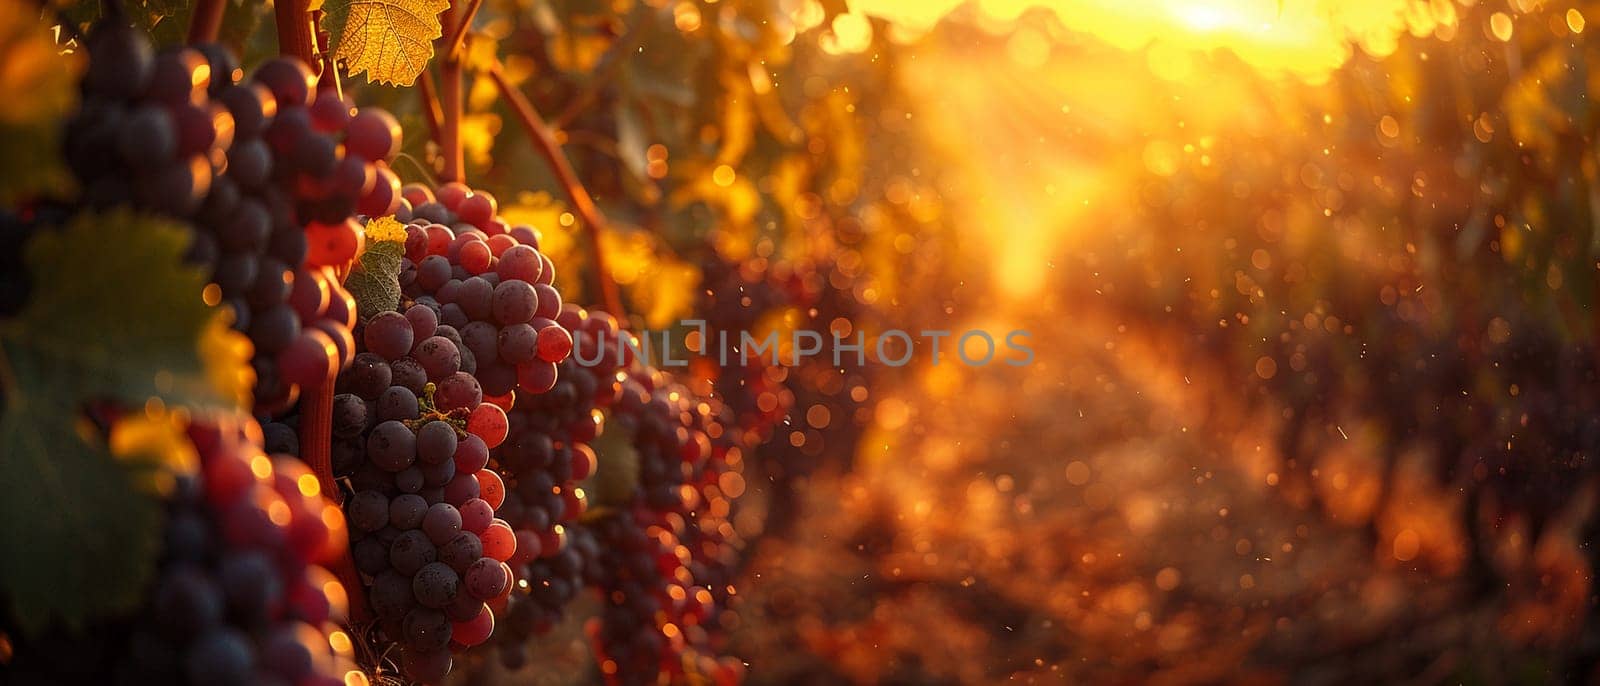 Sprawling Vineyard at Harvest Time with Workers in the Fields by Benzoix